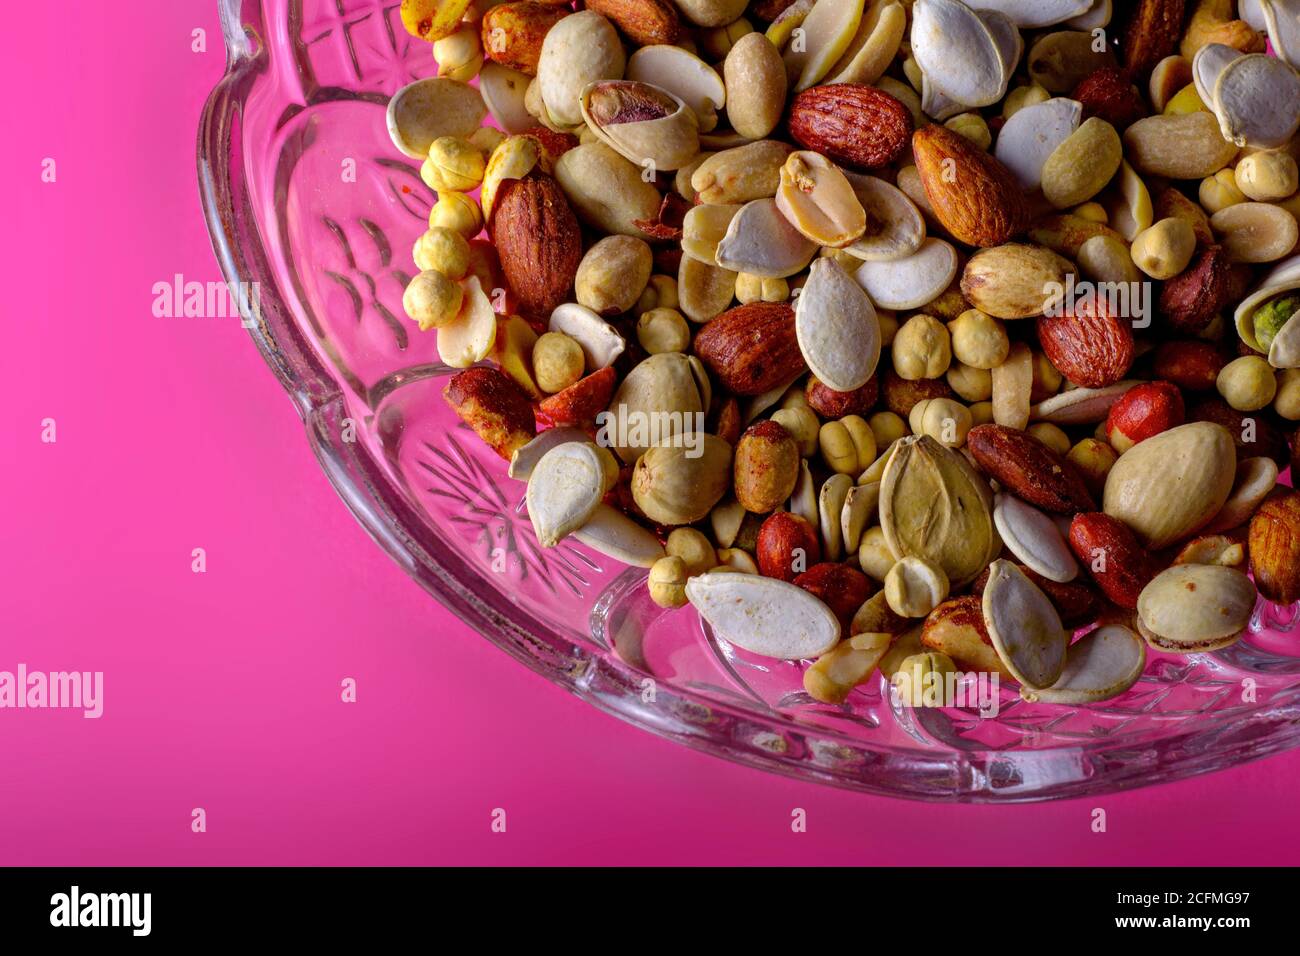 A cut shot of a dry fruits in a colorful environment Stock Photo